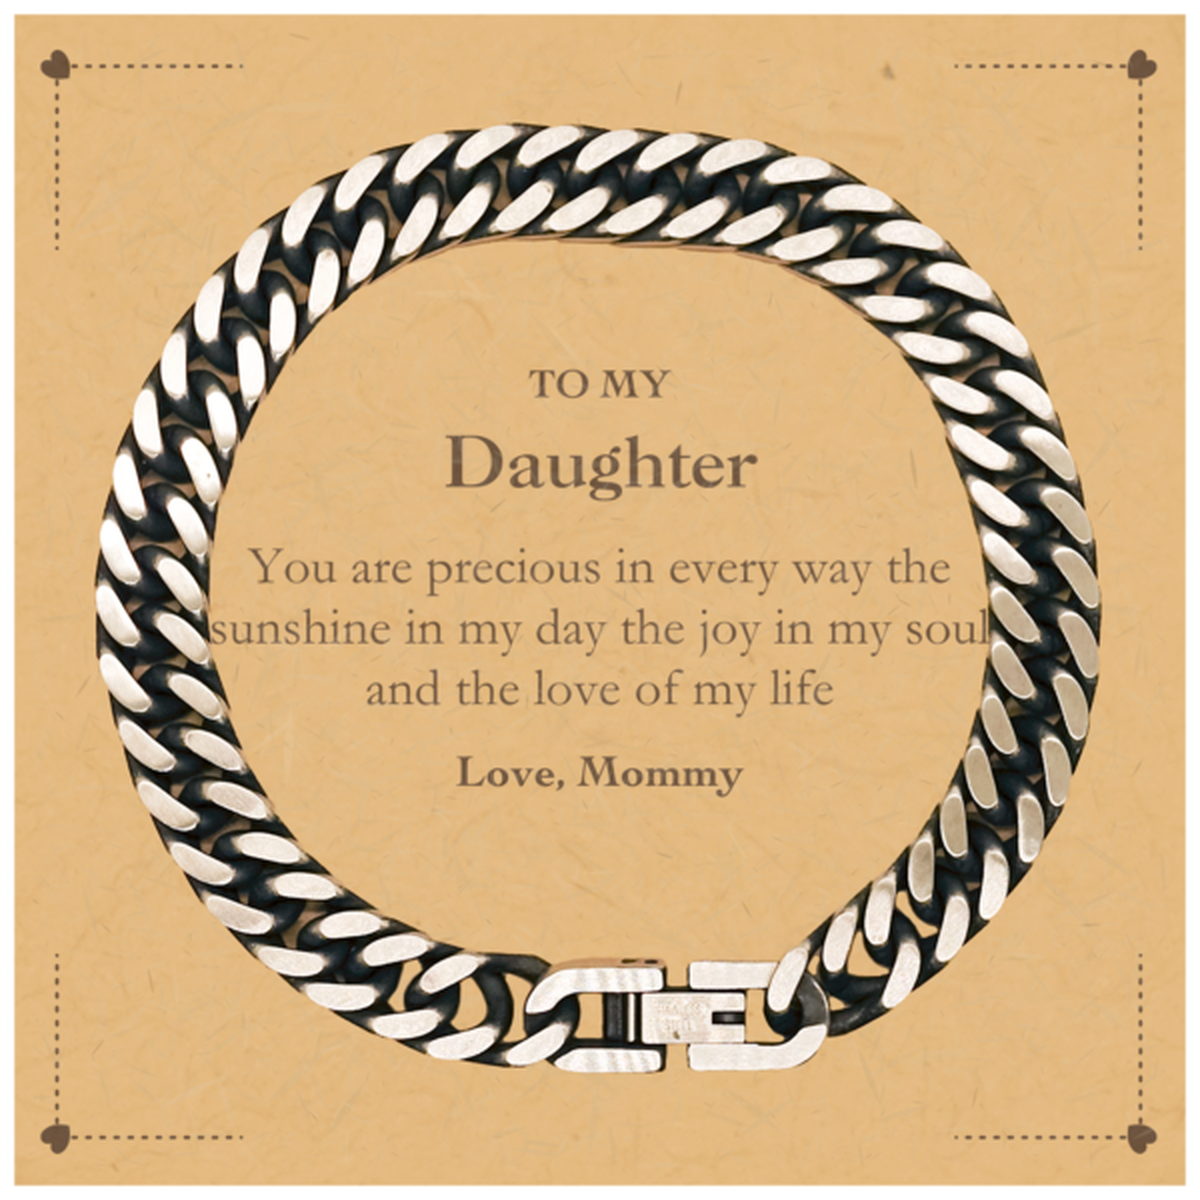 Graduation Gifts for Daughter Cuban Link Chain Bracelet Present from Mommy, Christmas Daughter Birthday Gifts Daughter You are precious in every way the sunshine in my day. Love, Mommy